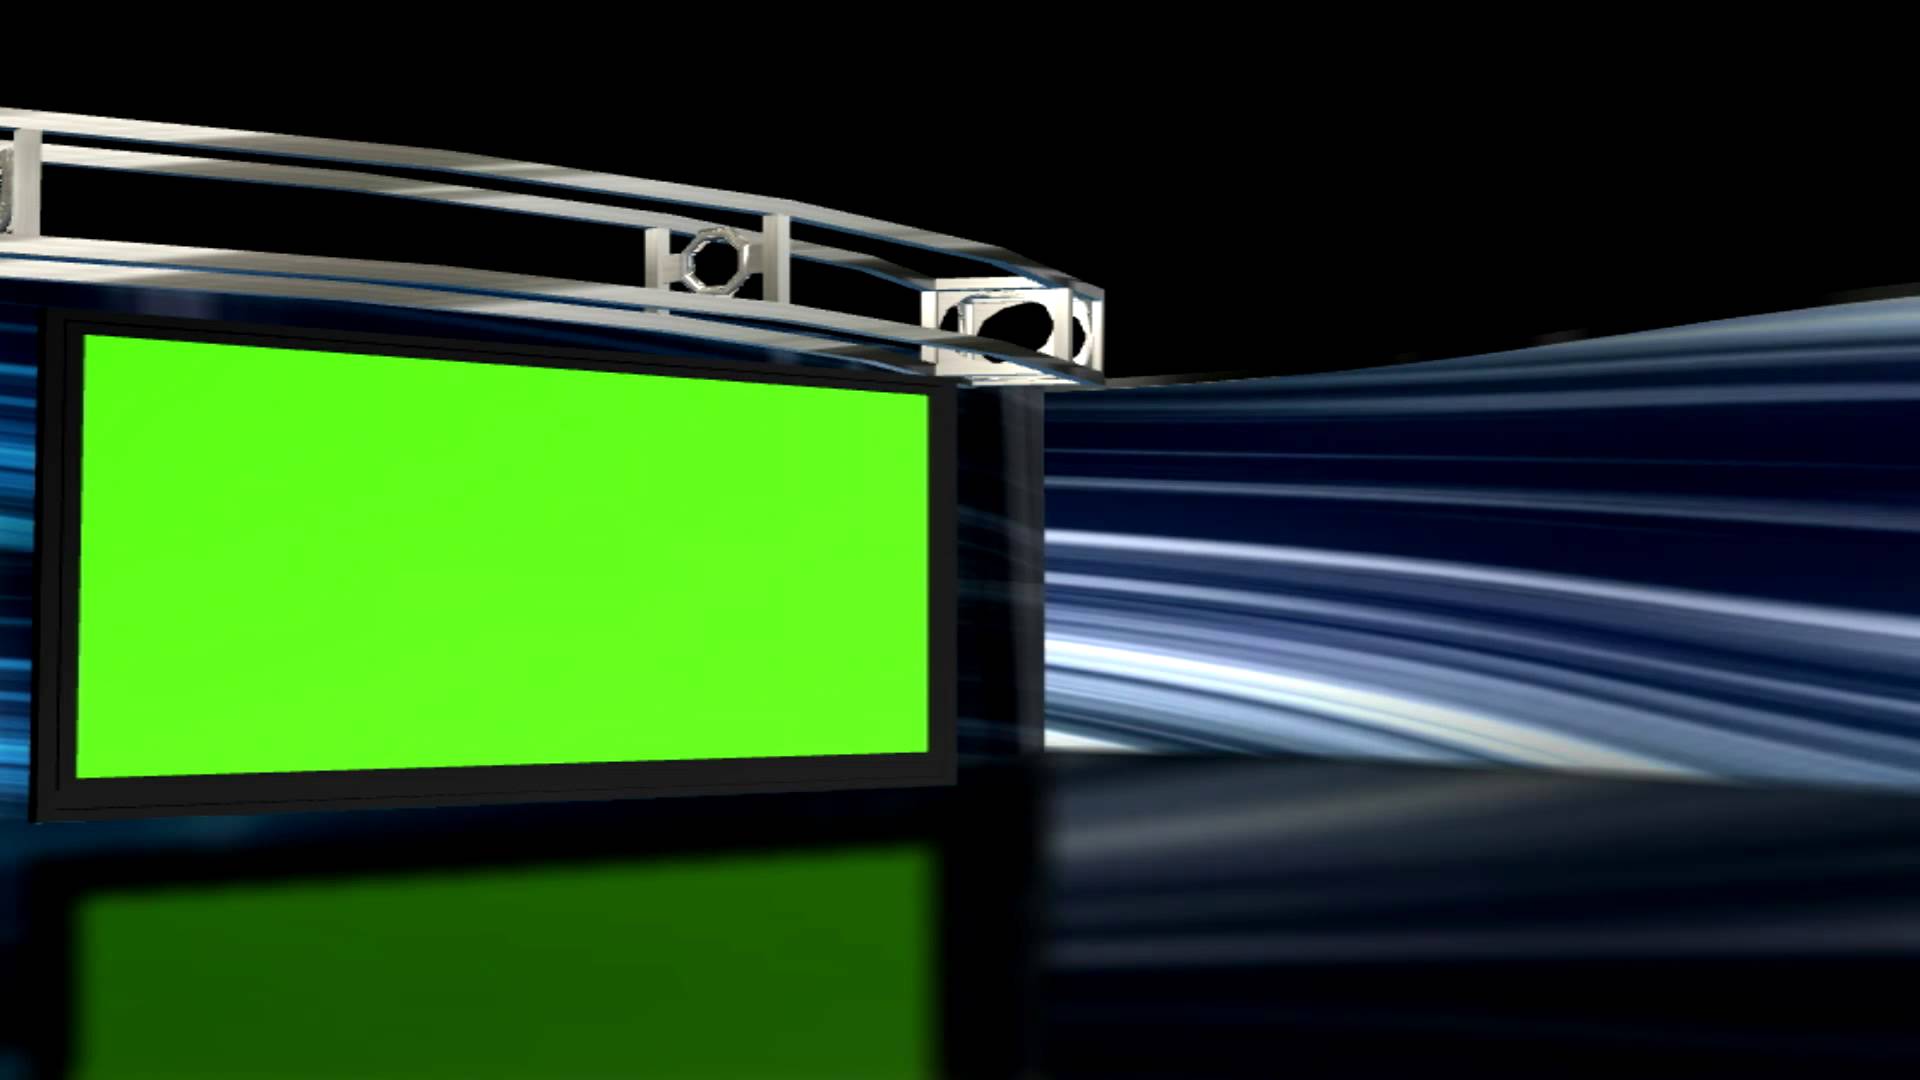 HD Virtual Studio set Background 1 with Green screen TV set. Virtual studio, Chroma key, Chroma key background